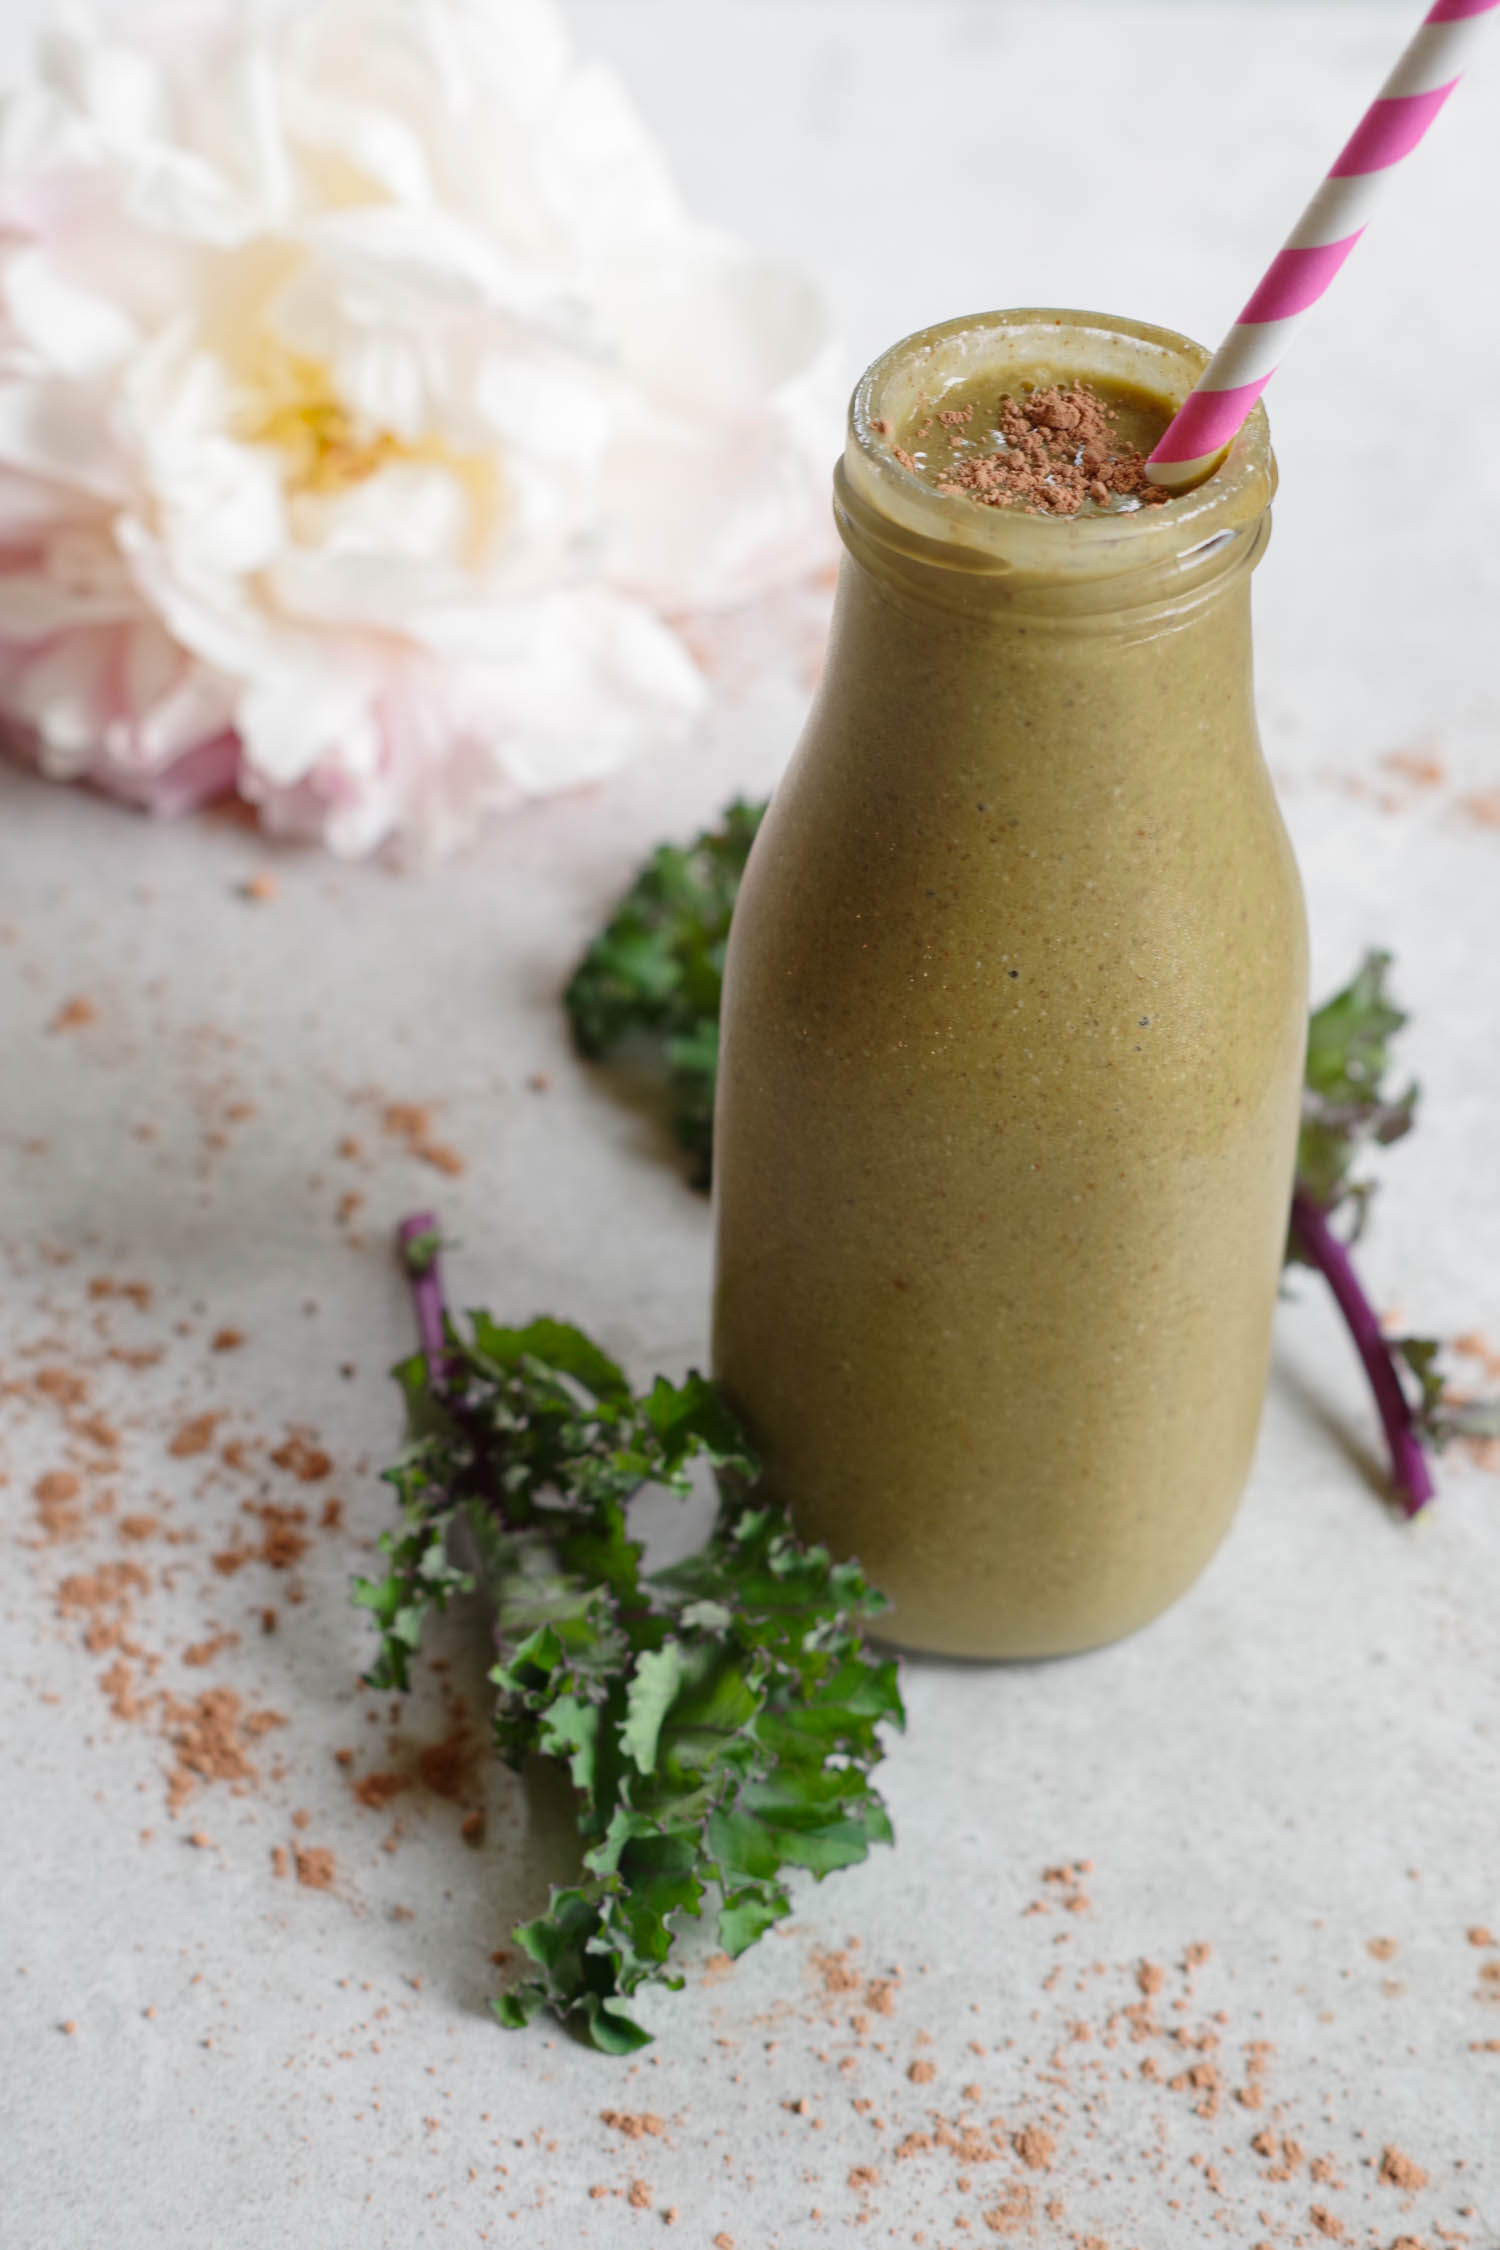 Chocolate Almond Kale Smoothie as a Meal on the Go, by Beautiful Ingredient